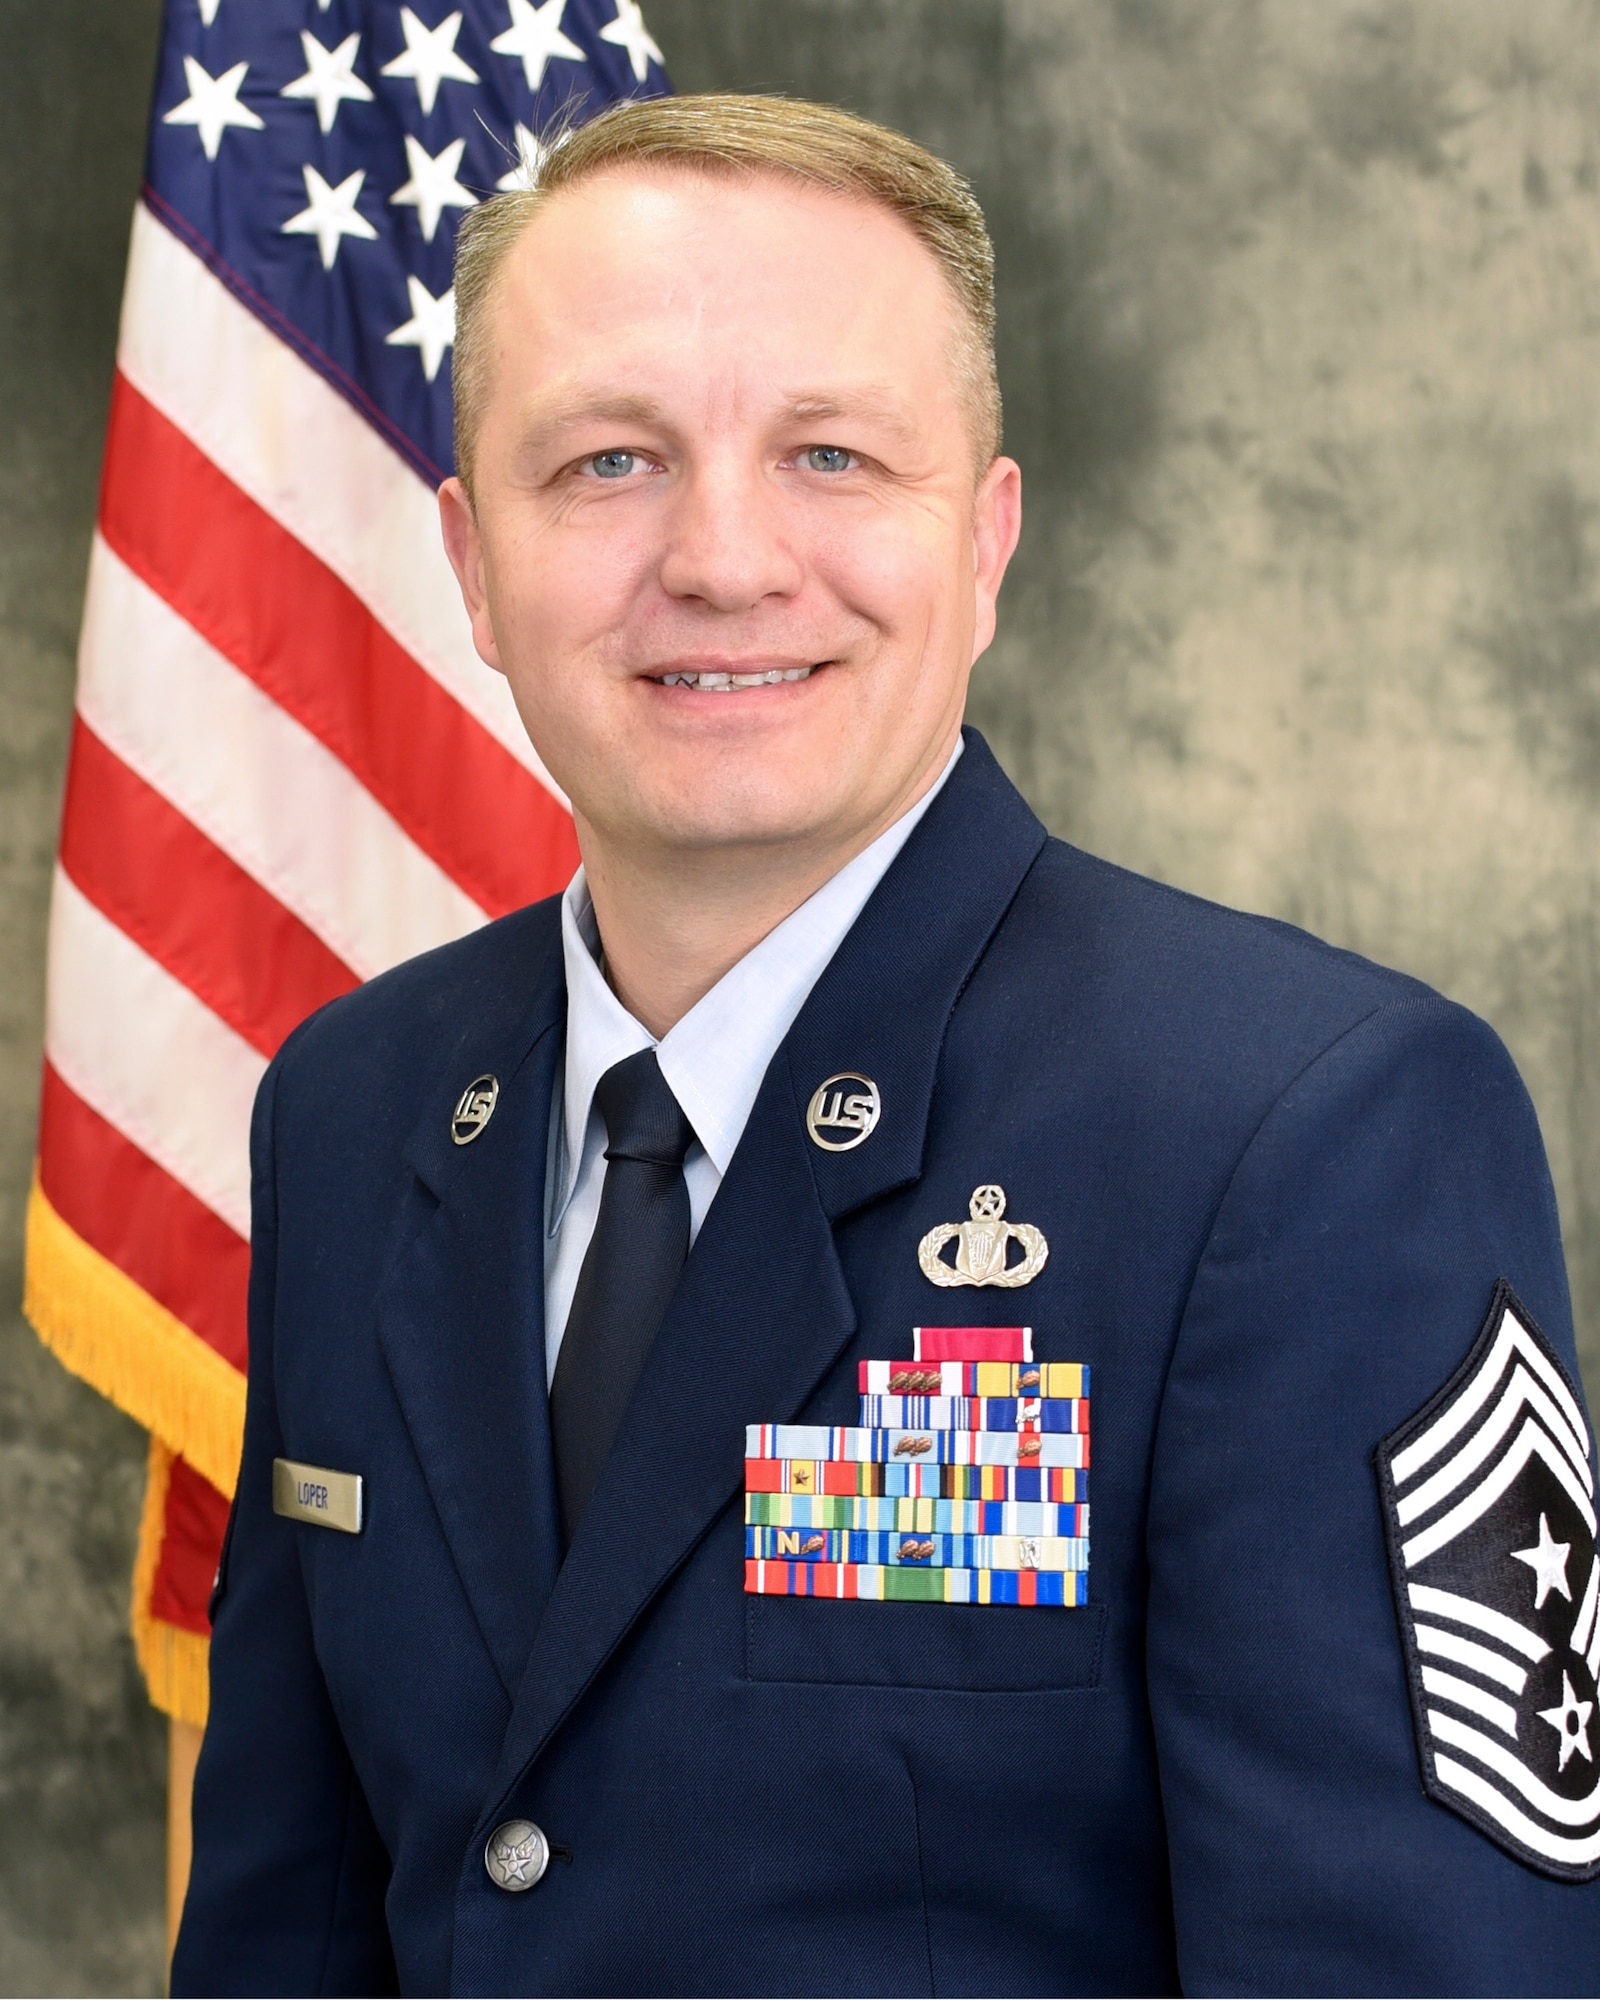 Chief Master Sgt. James W. Loper is the Tenth Air Force Command Chief Master Sgt. . He advises the 10th Air Force Commander on all matters concerning the health, morale, welfare and effective management of more than 20,000 Reserve members at 30 locations.